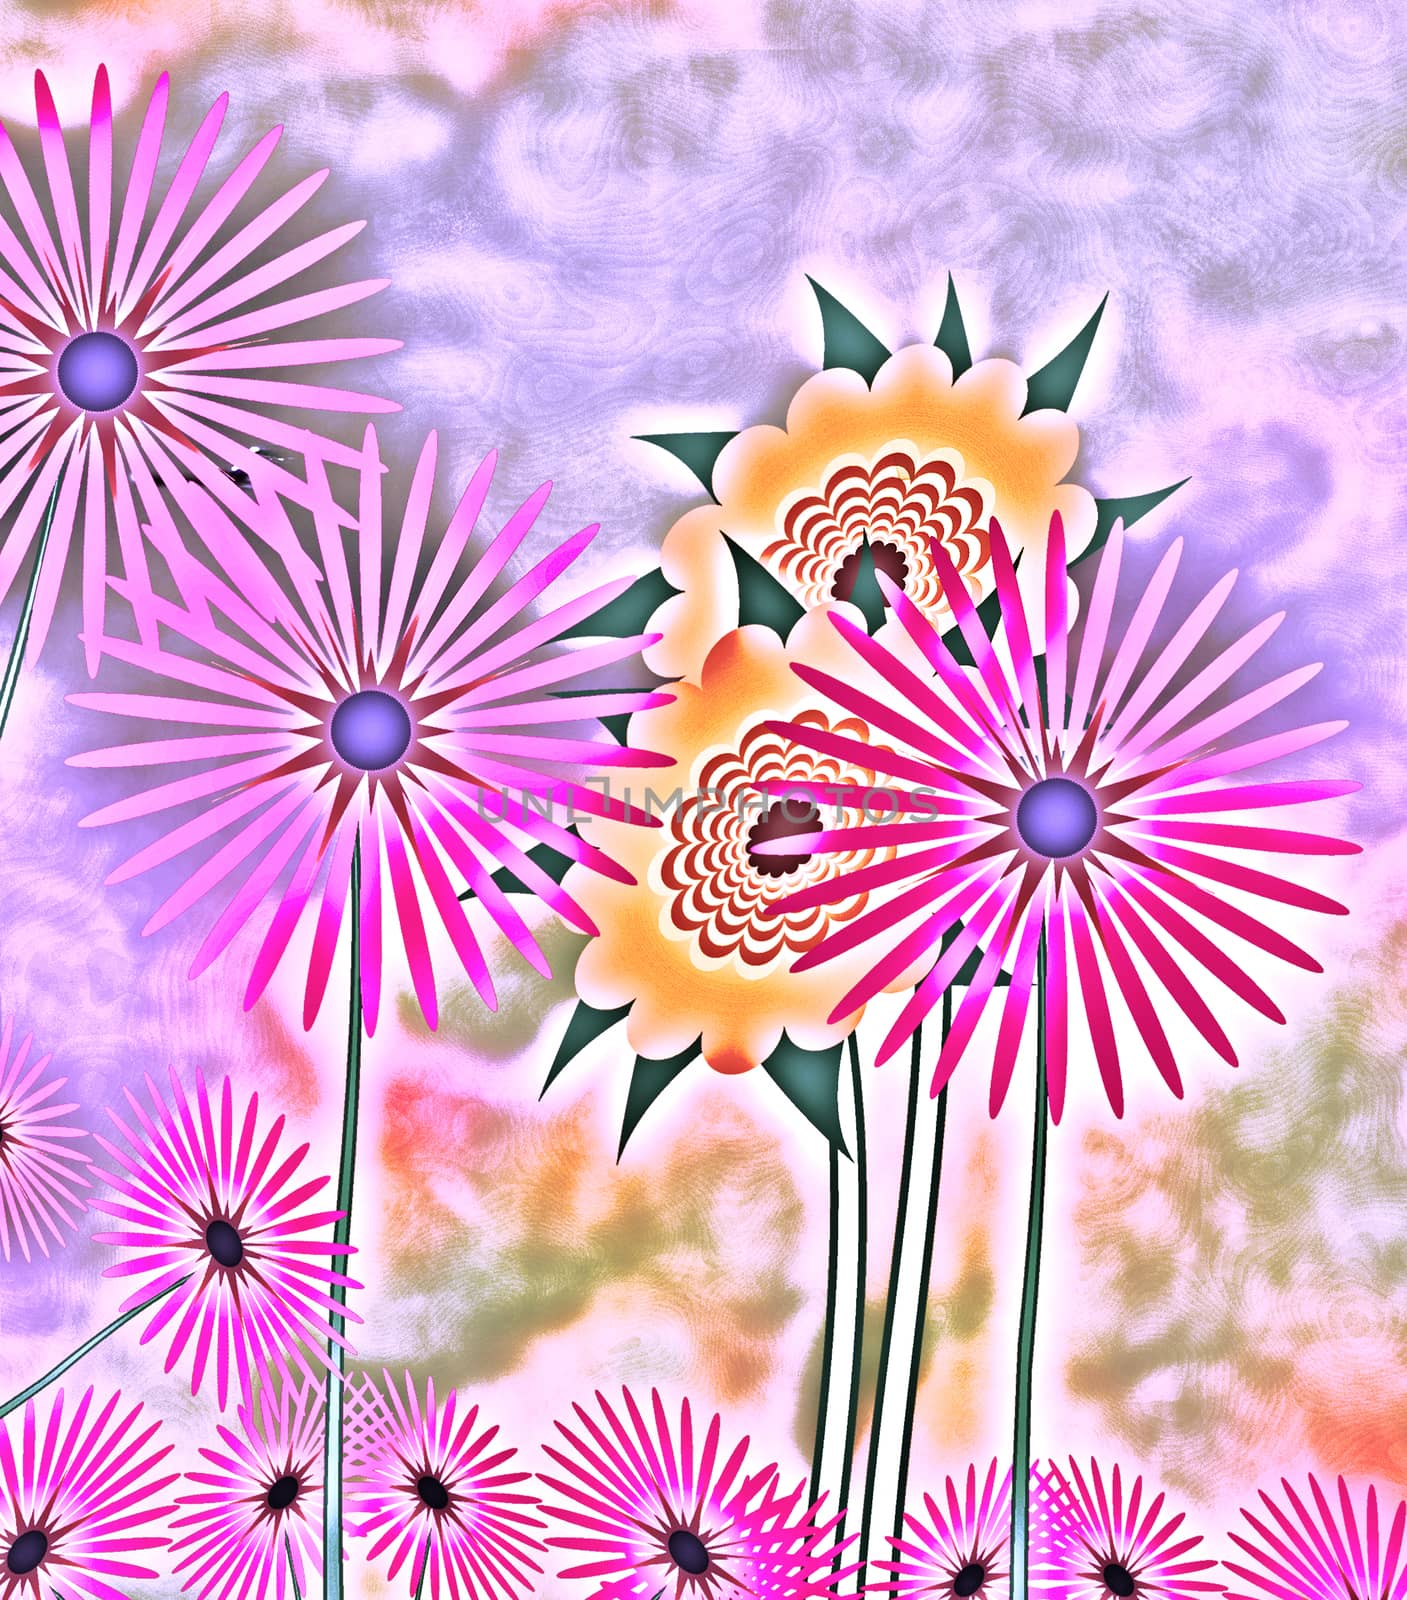 Bright colorful abstract Spring flowers background